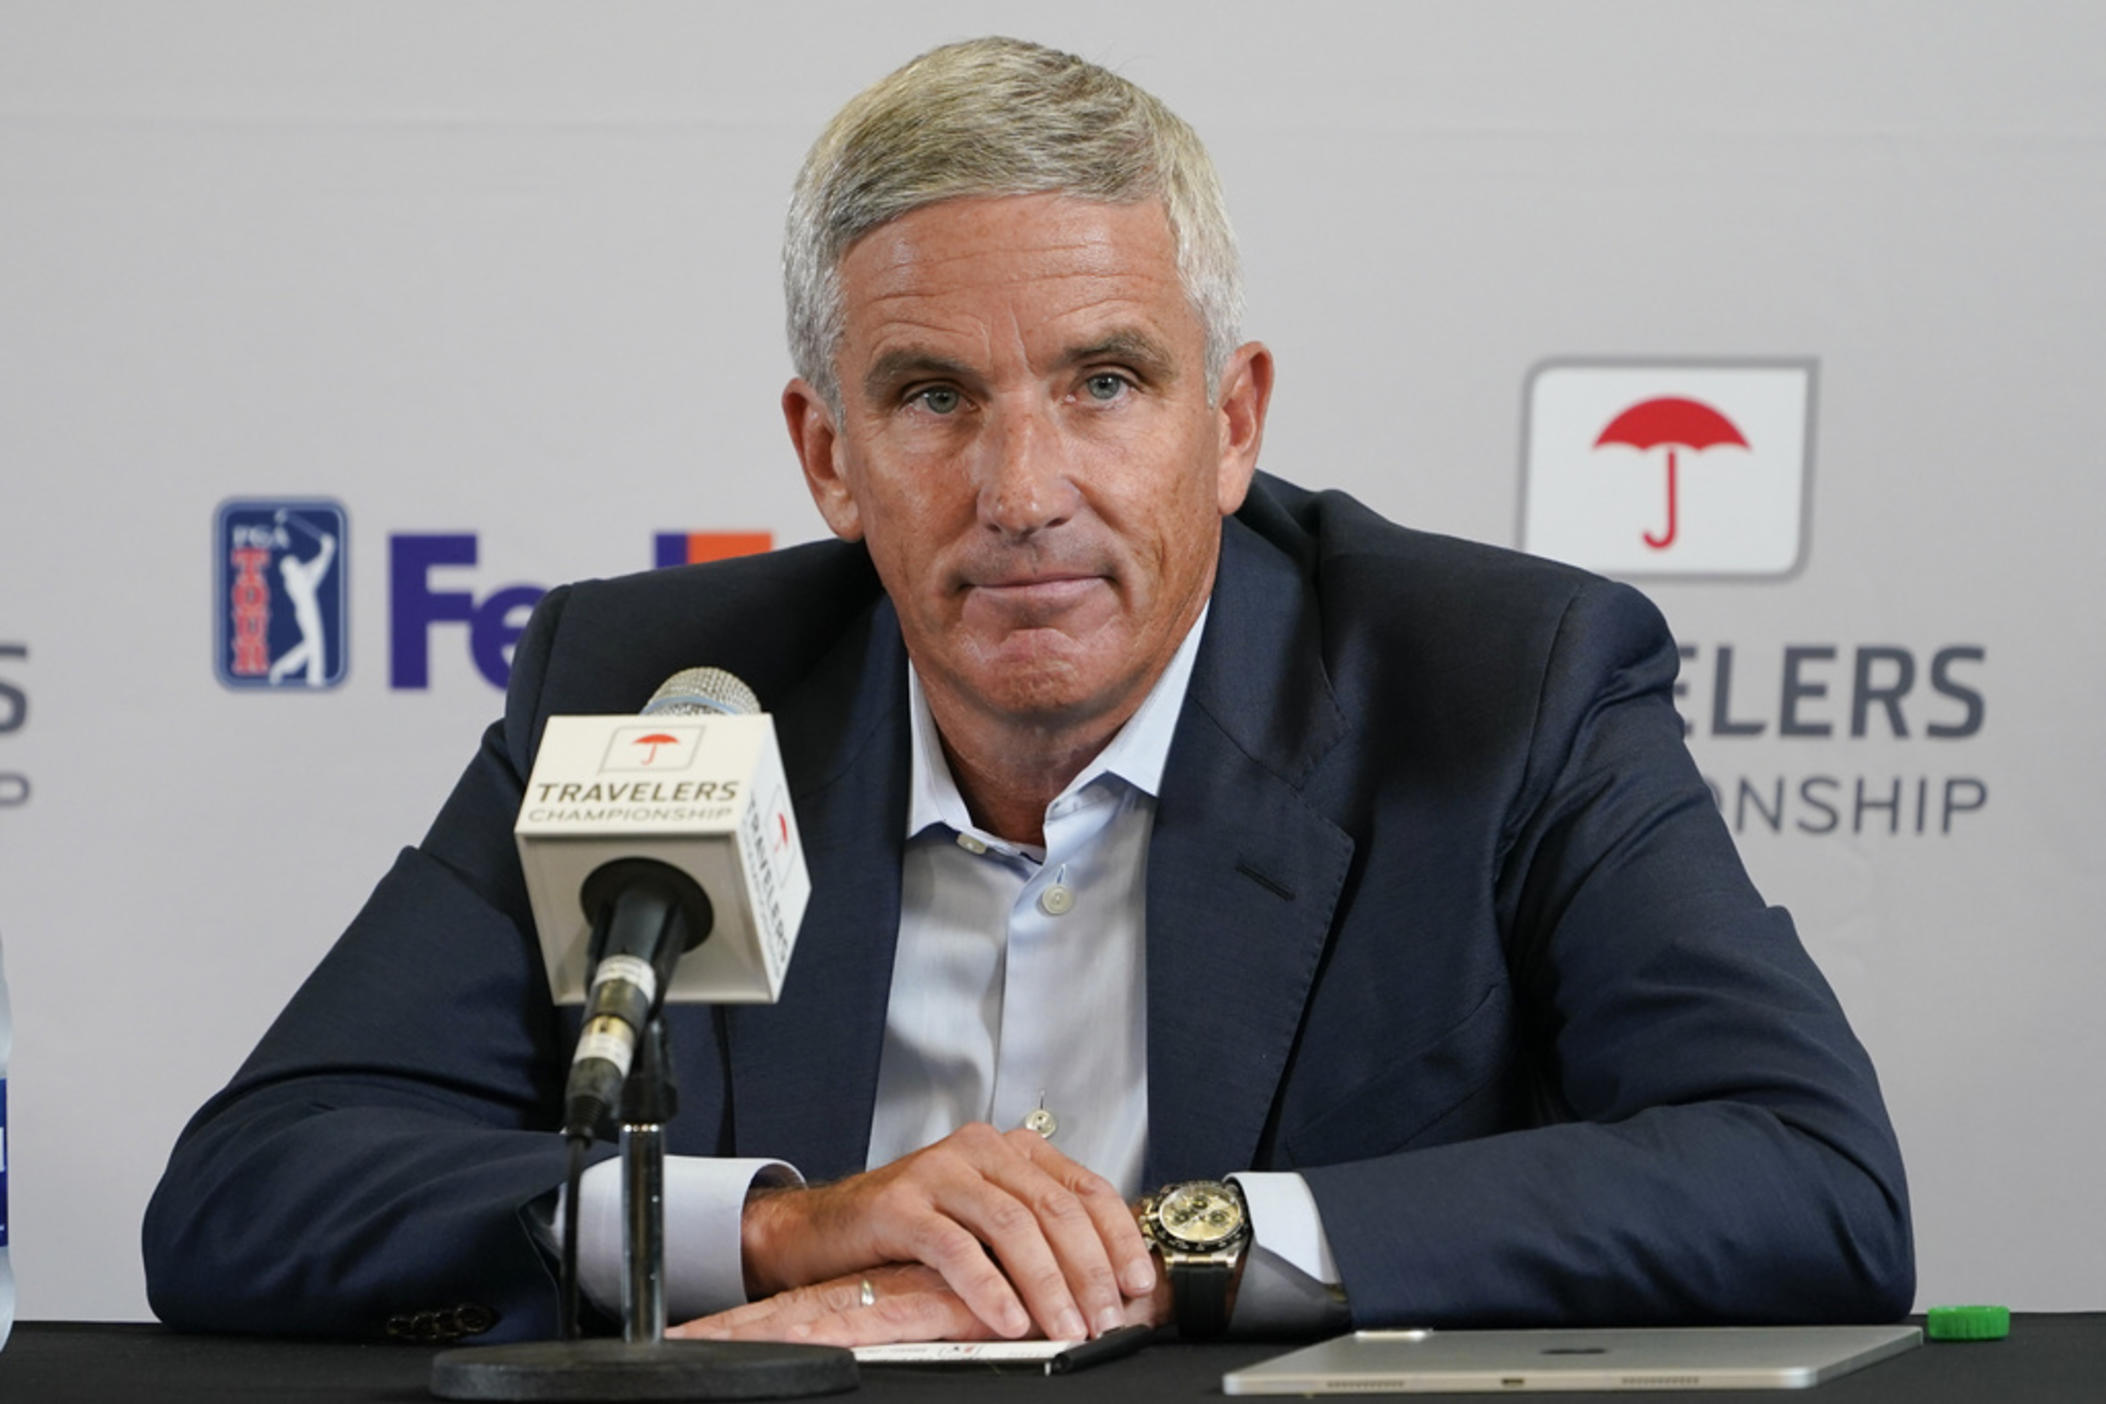 GA Tour Commissioner Jay Monahan speaks during a news conference before the start of the Travelers Championship golf tournament at TPC River Highlands, Wednesday, June 22, 2022, in Cromwell, Conn.